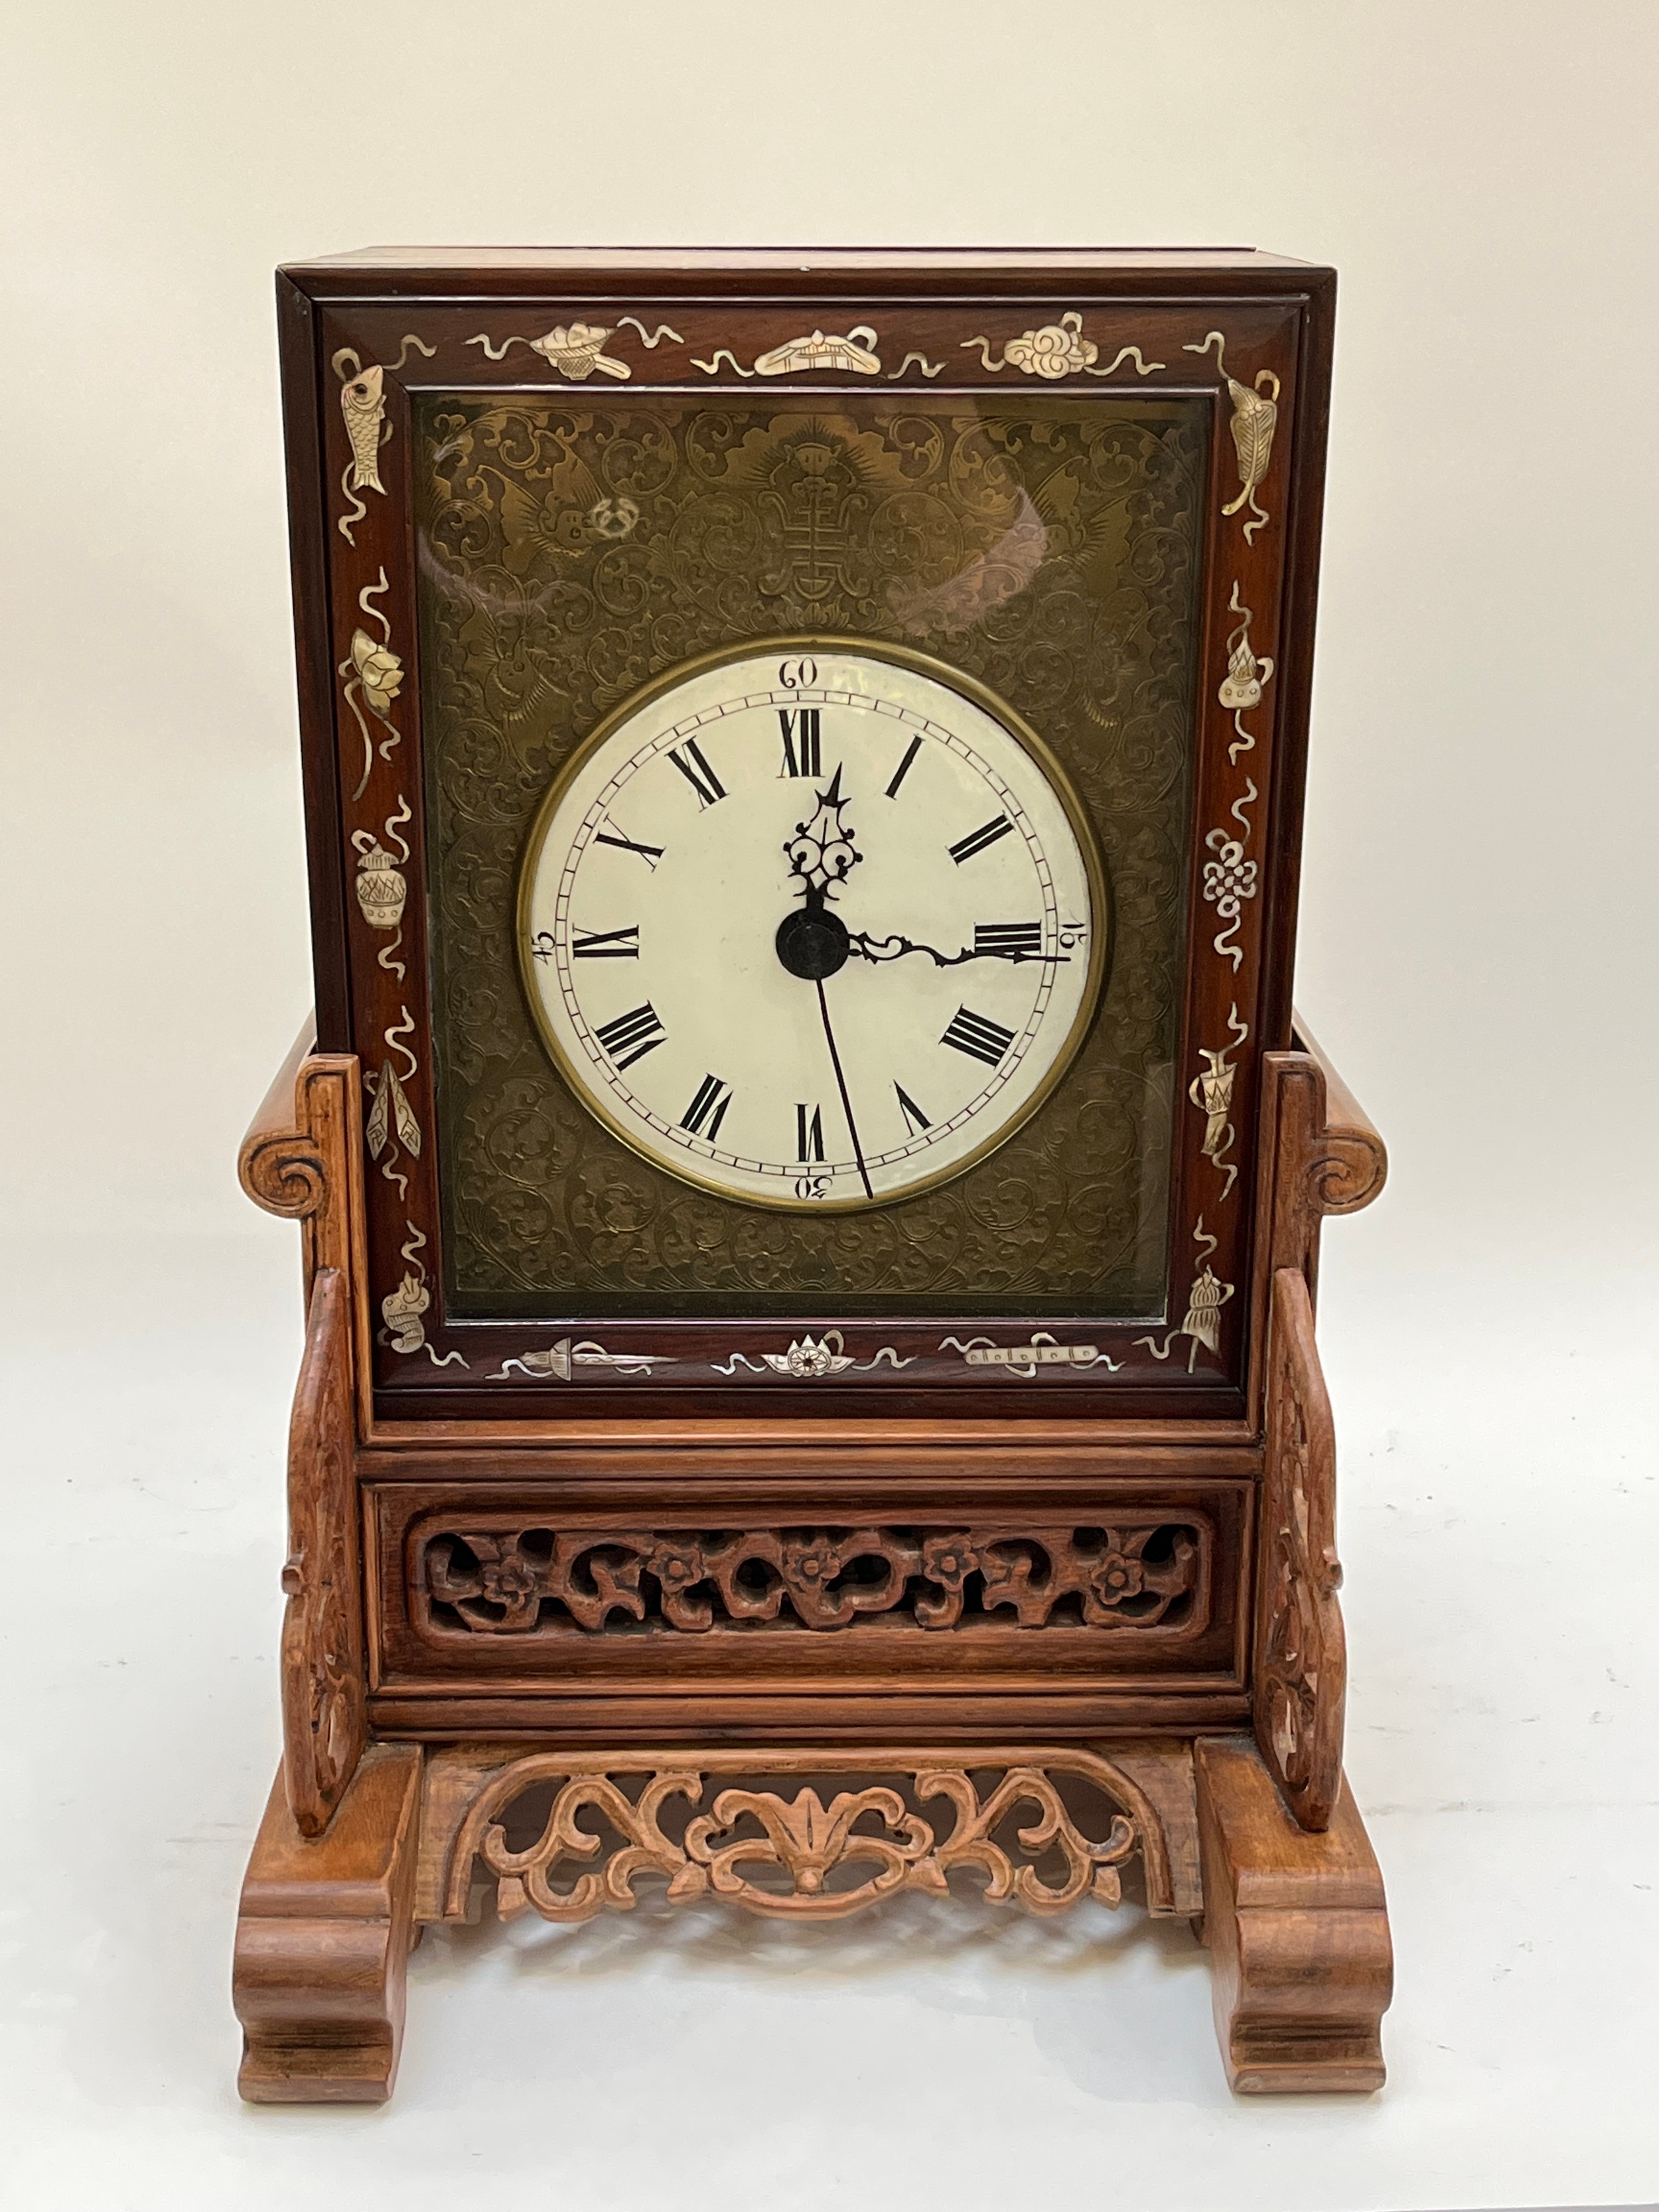 A late 19th Century Chinese mantel clock, double fusee movement, brass movement with crown wheel